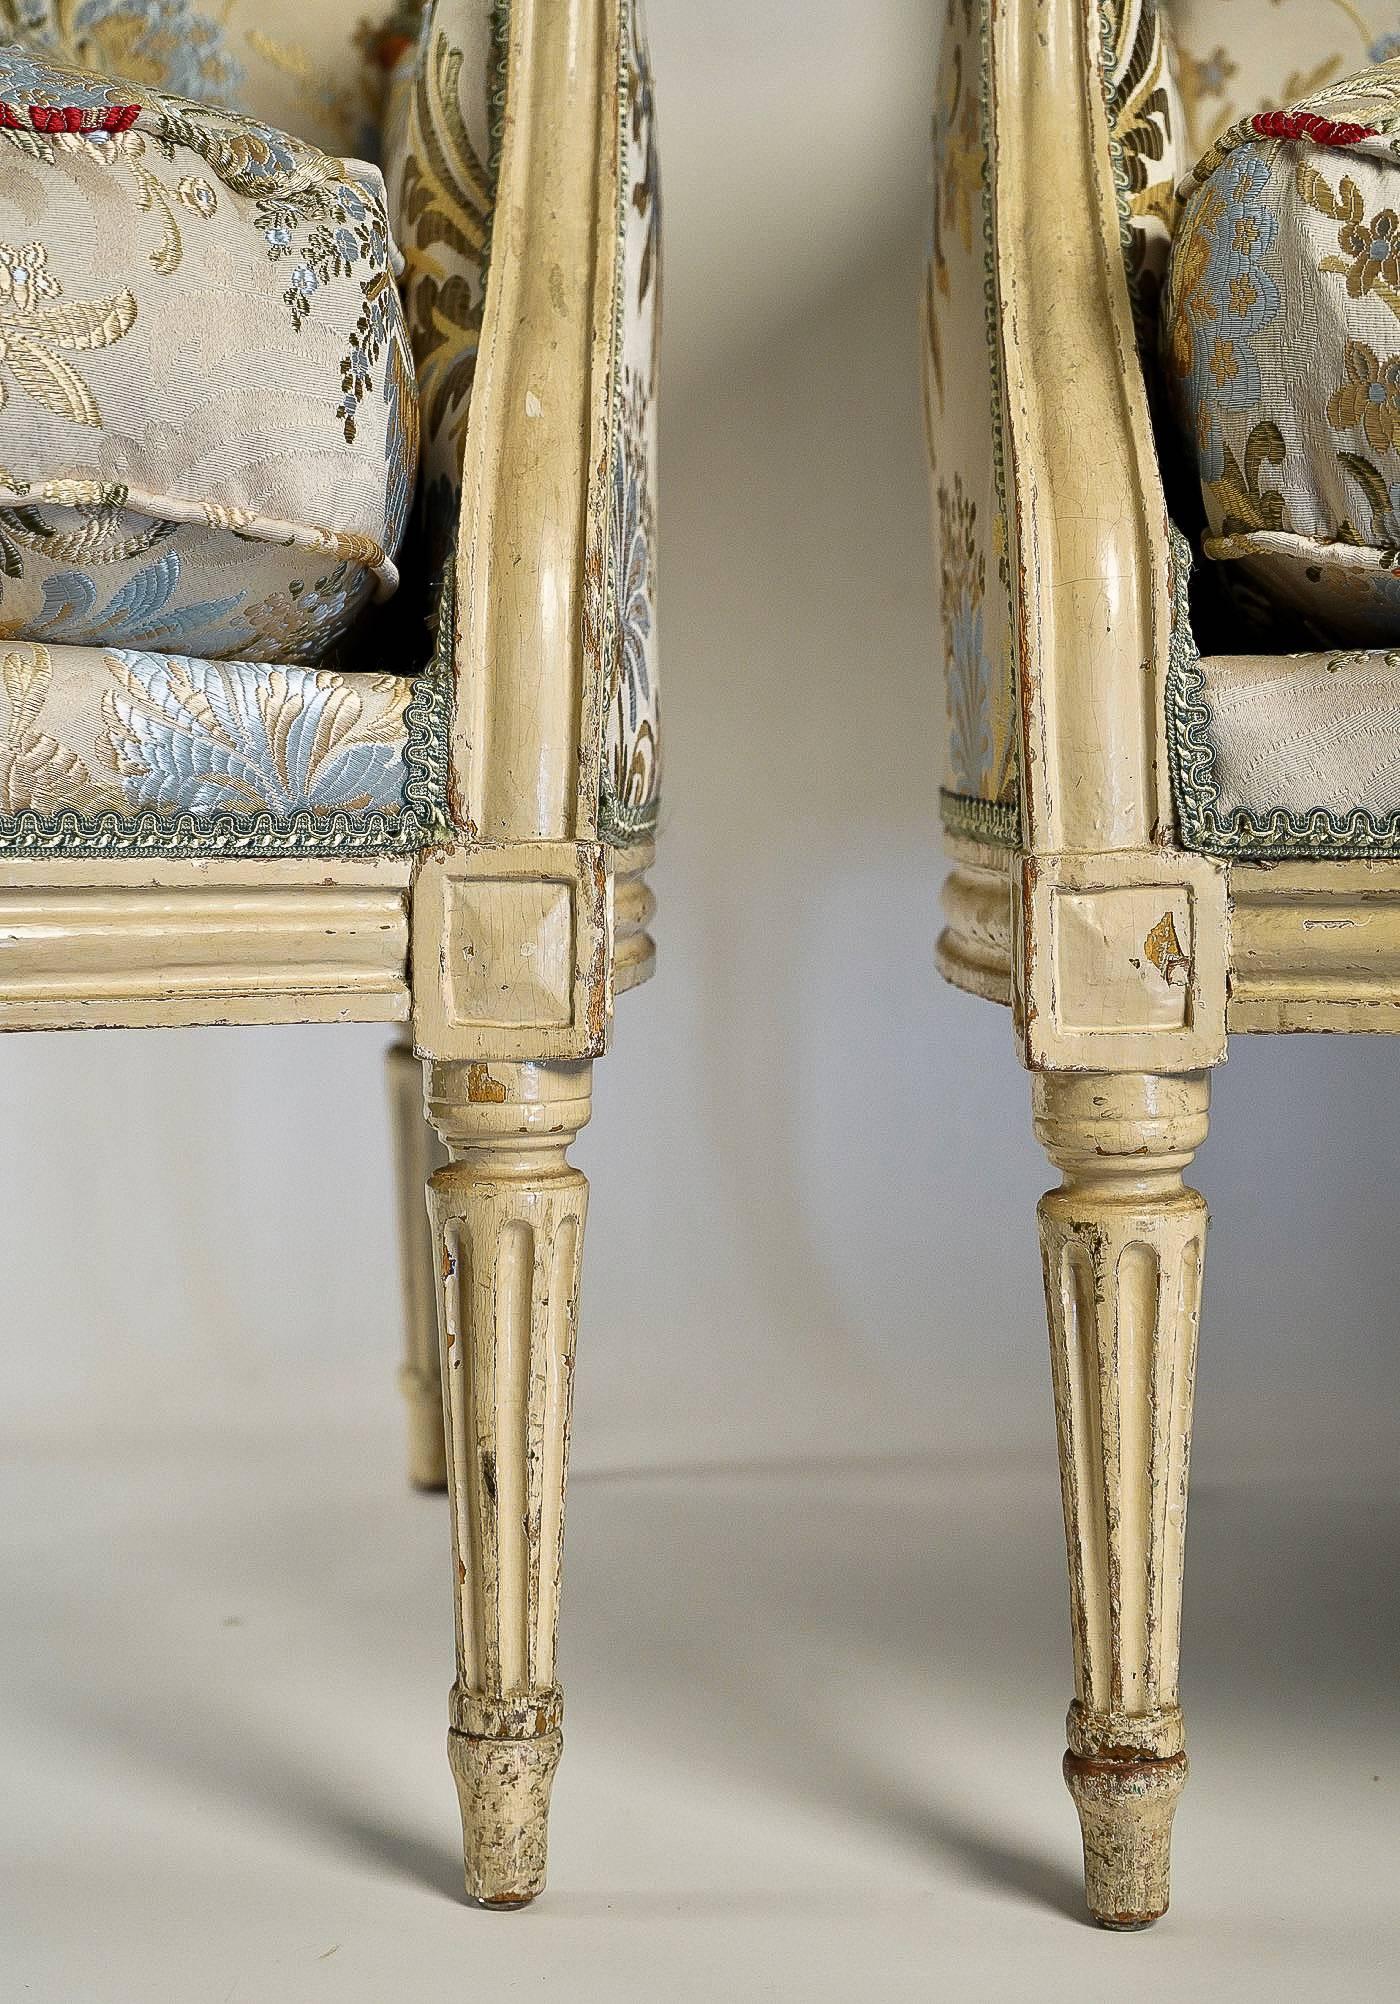 French 18th Century Lacquered Beechwood Four-Piece Salon Suite Louis XVI Period For Sale 3